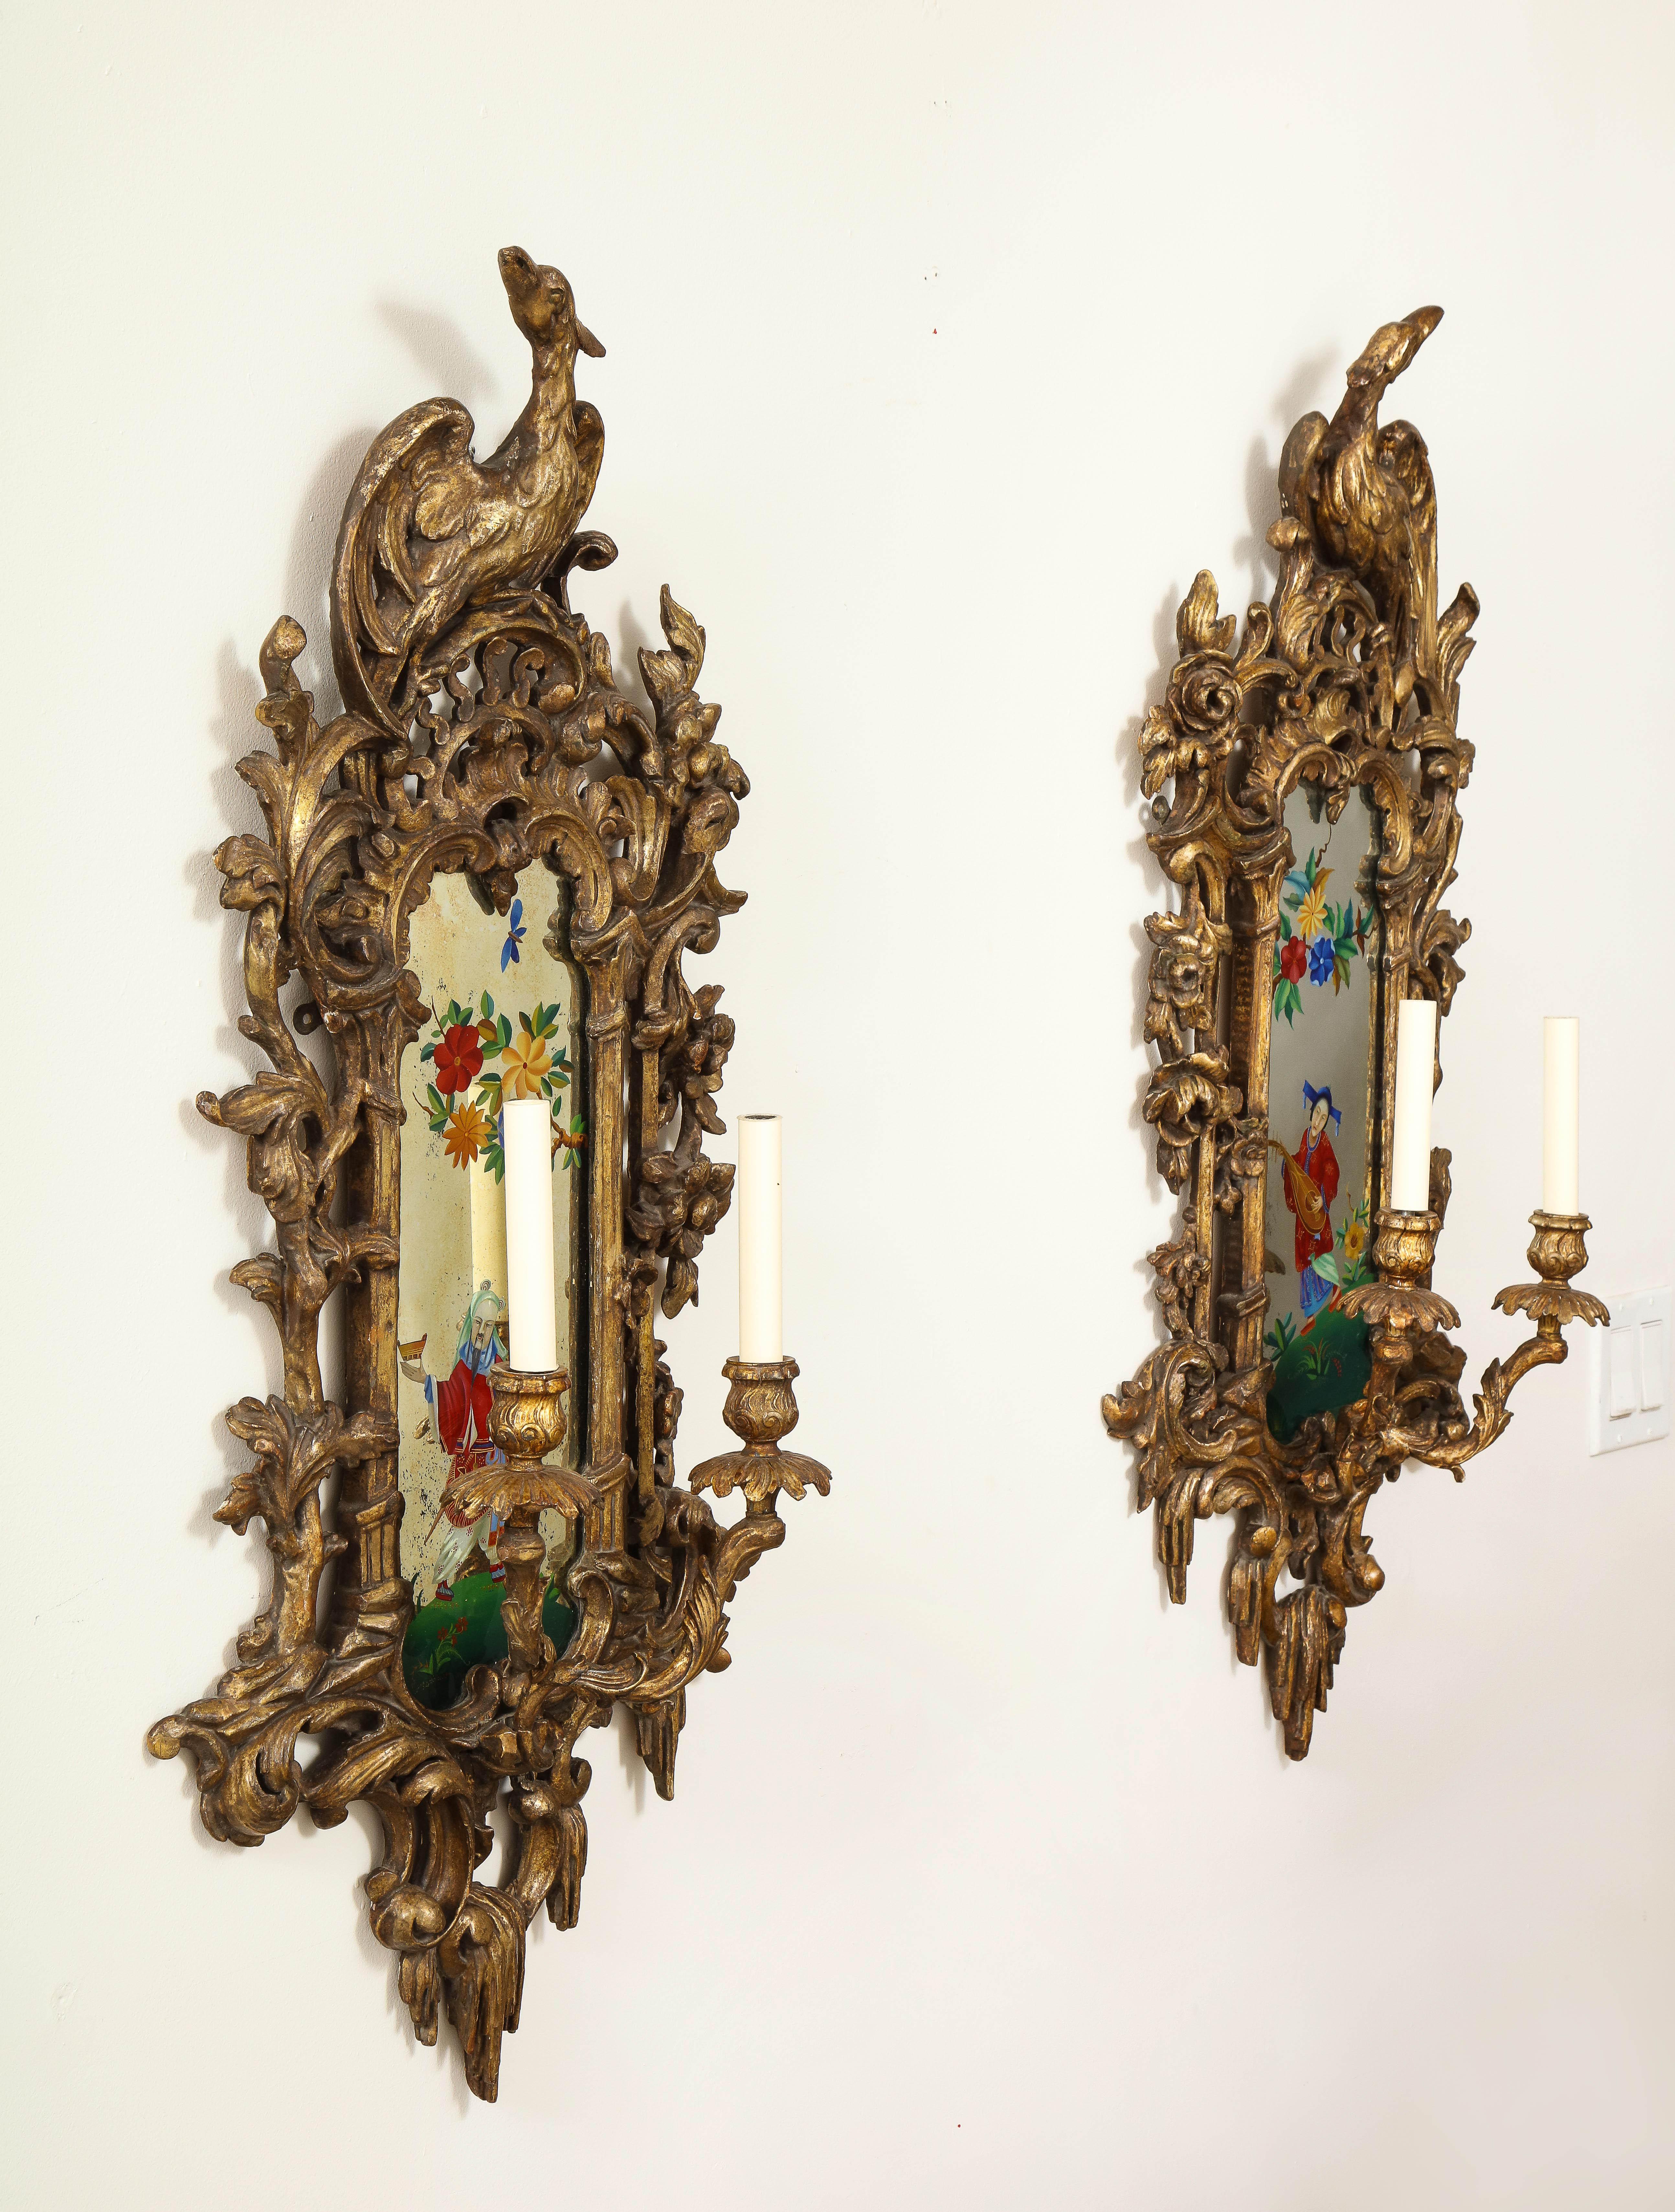 A fantastic pair of English chinoiserie painted reverse on glass, carved giltwood mirrored two-light sconces. Each is beautifully hand carved and gilt in a gorgeous gold finish with fabulous hand carved open-work and two mirror-image giltwood birds